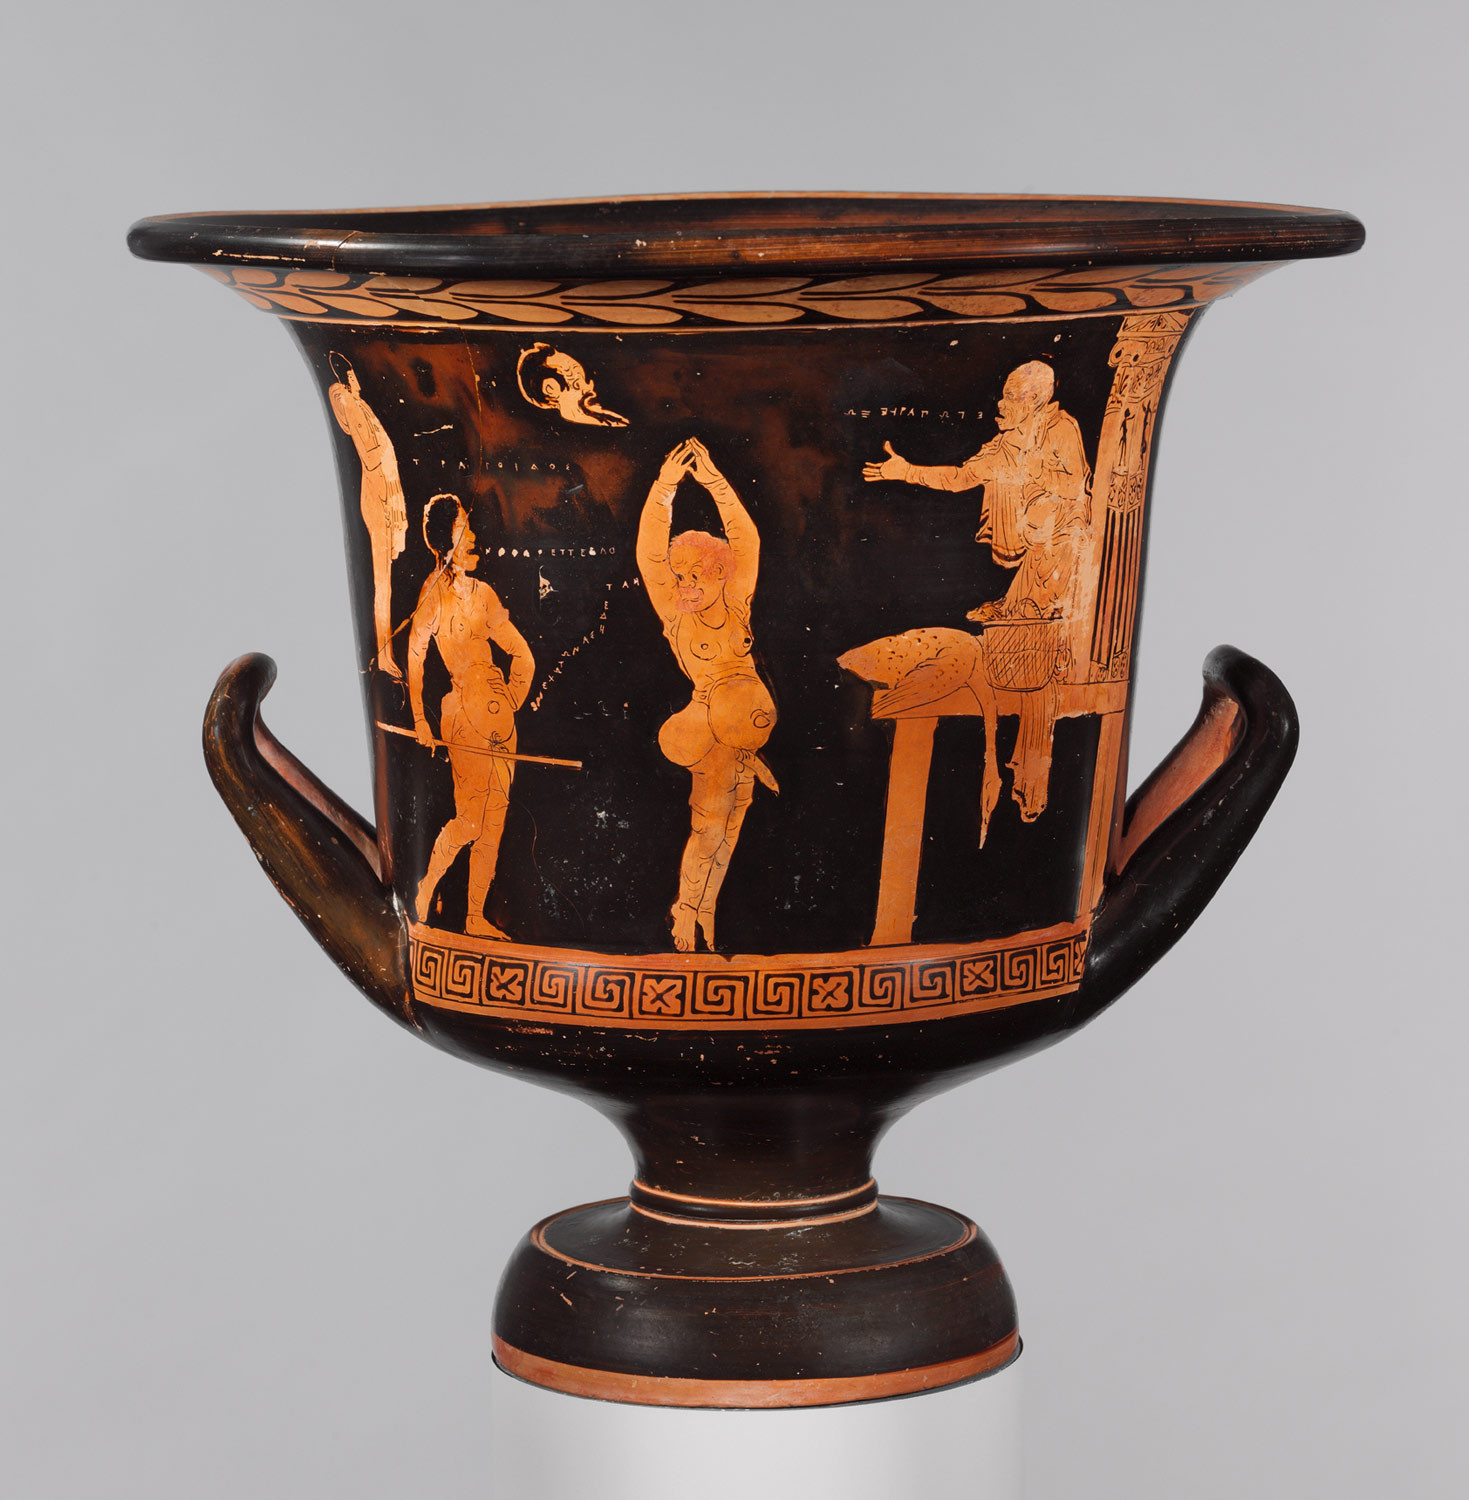 middle kingdom porcelain vases of theater in ancient greece essay heilbrunn timeline of art throughout terracotta calyx krater mixing bowl